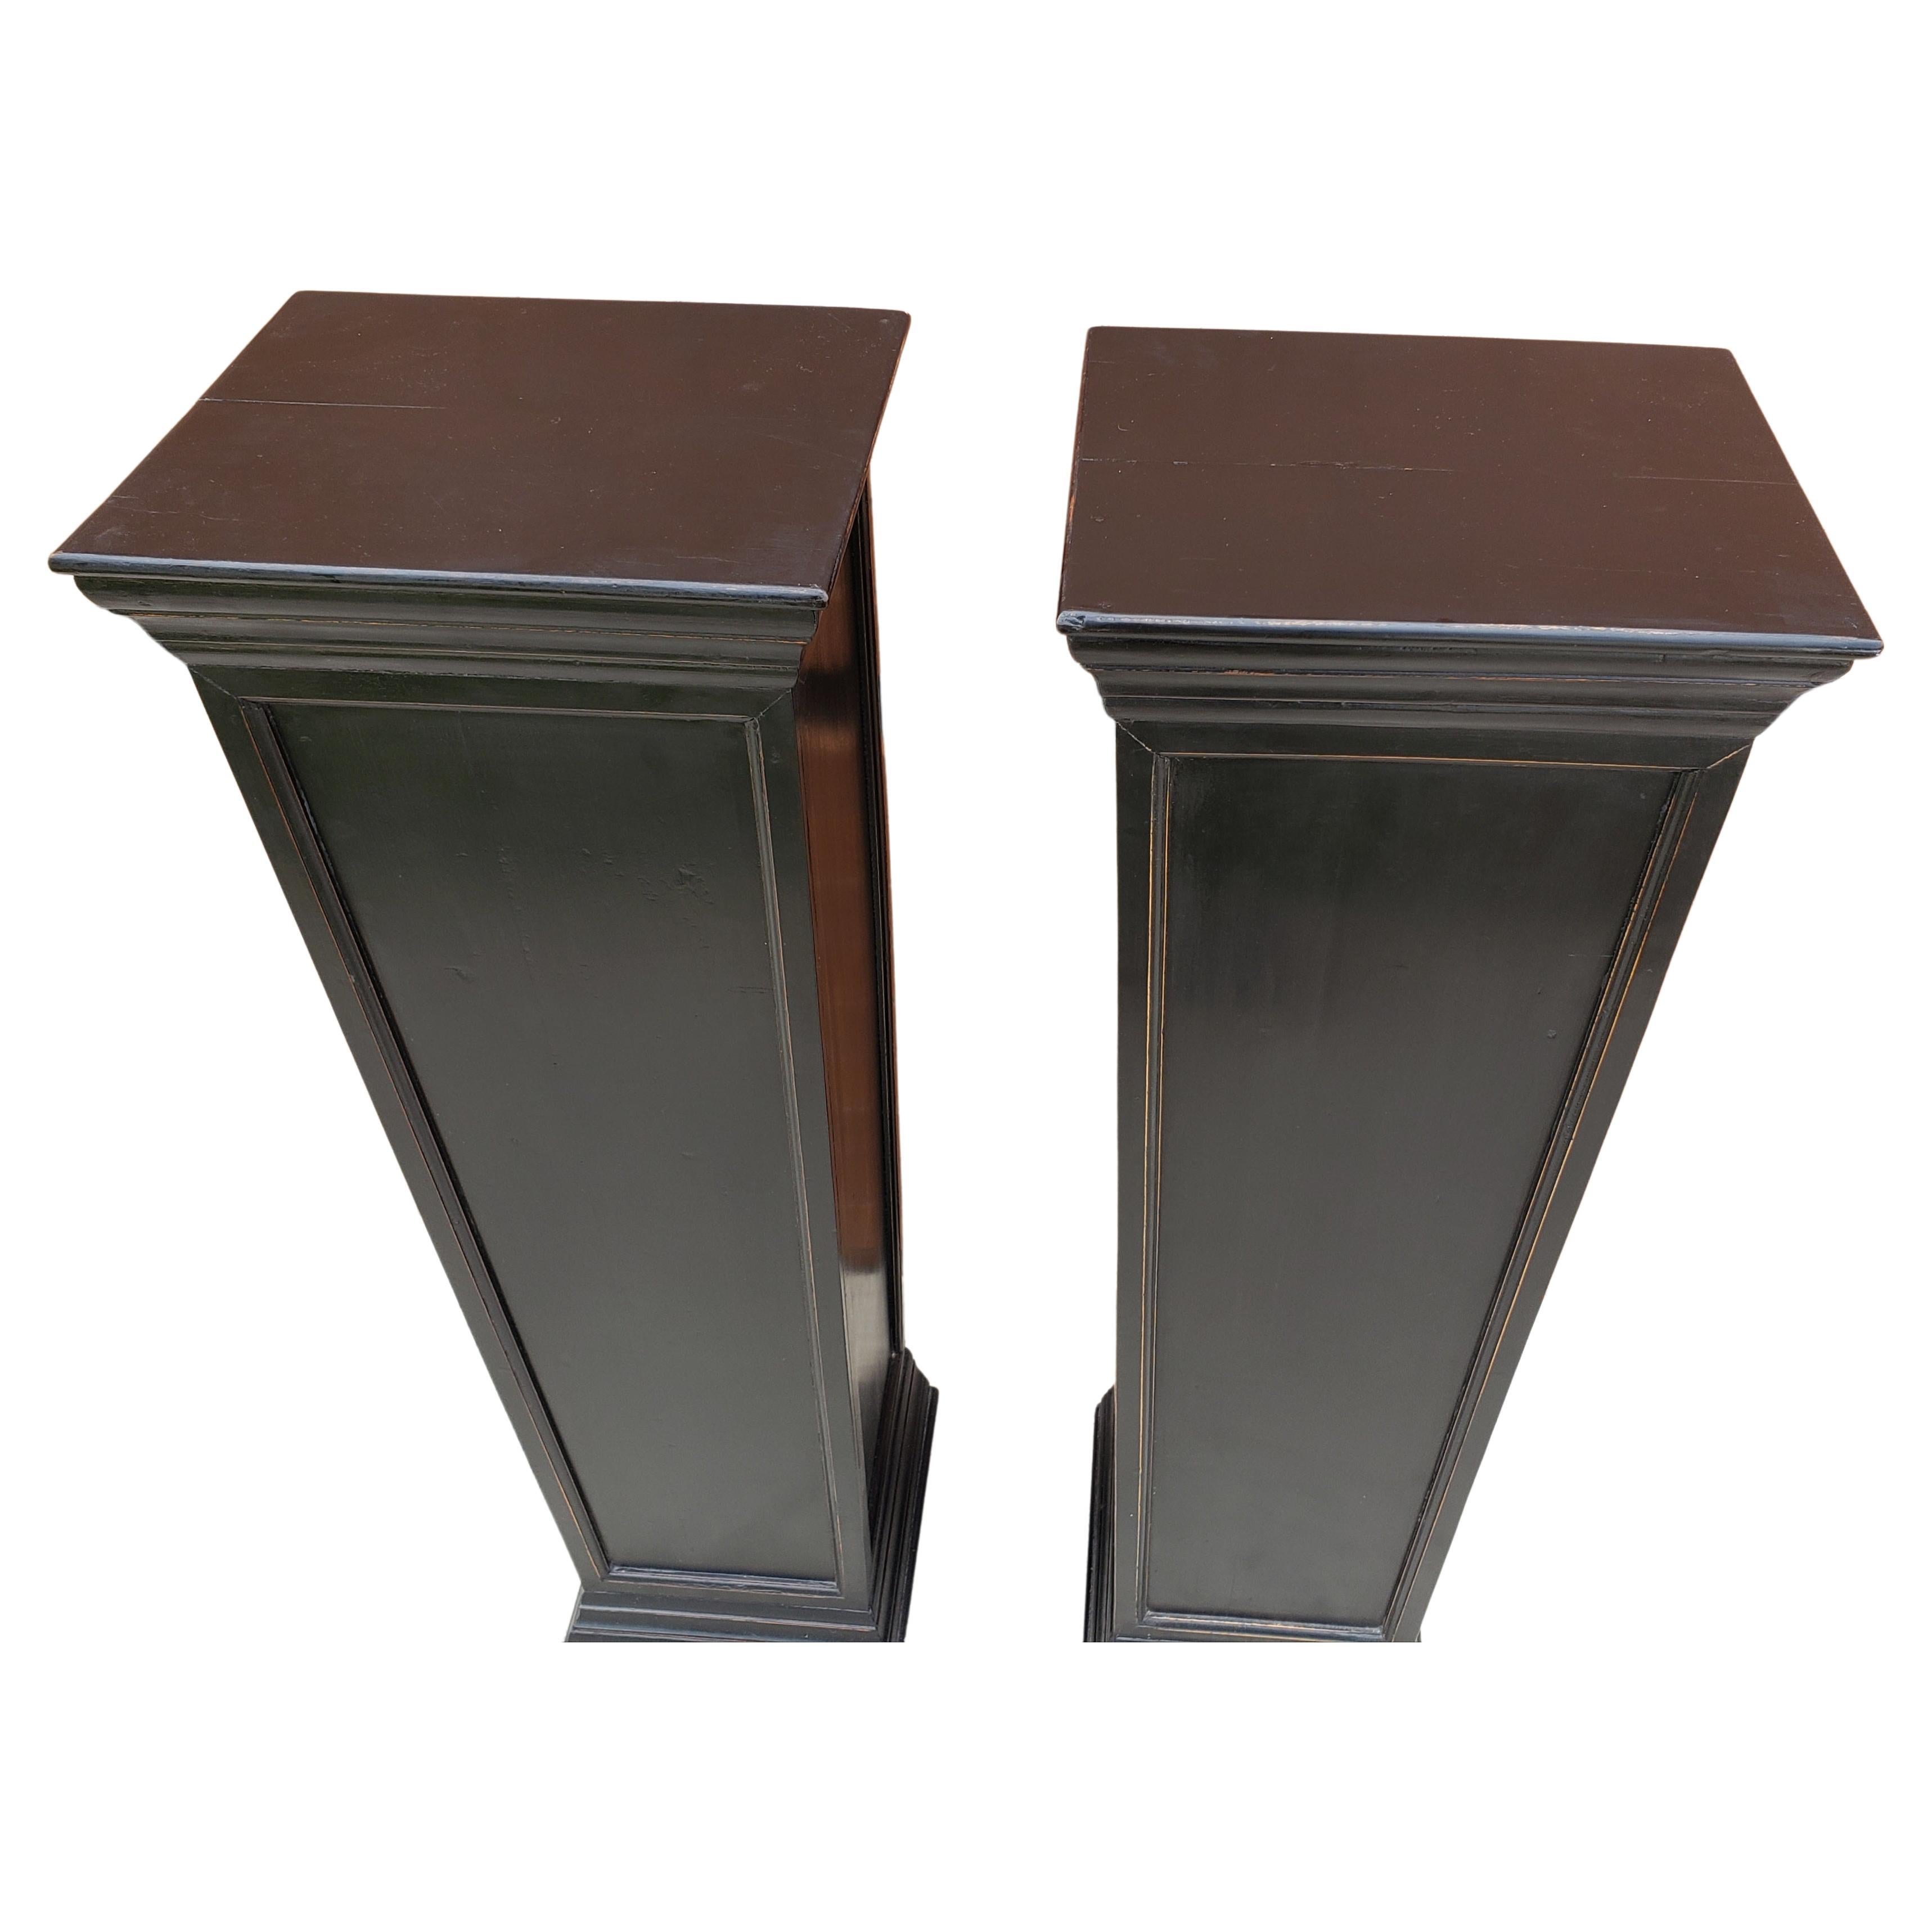 A pair directoire style ebonized fruitwood oblong pedestals.
Measure 15 inches in width, 12 inches in depth and stand 47 inches tall.